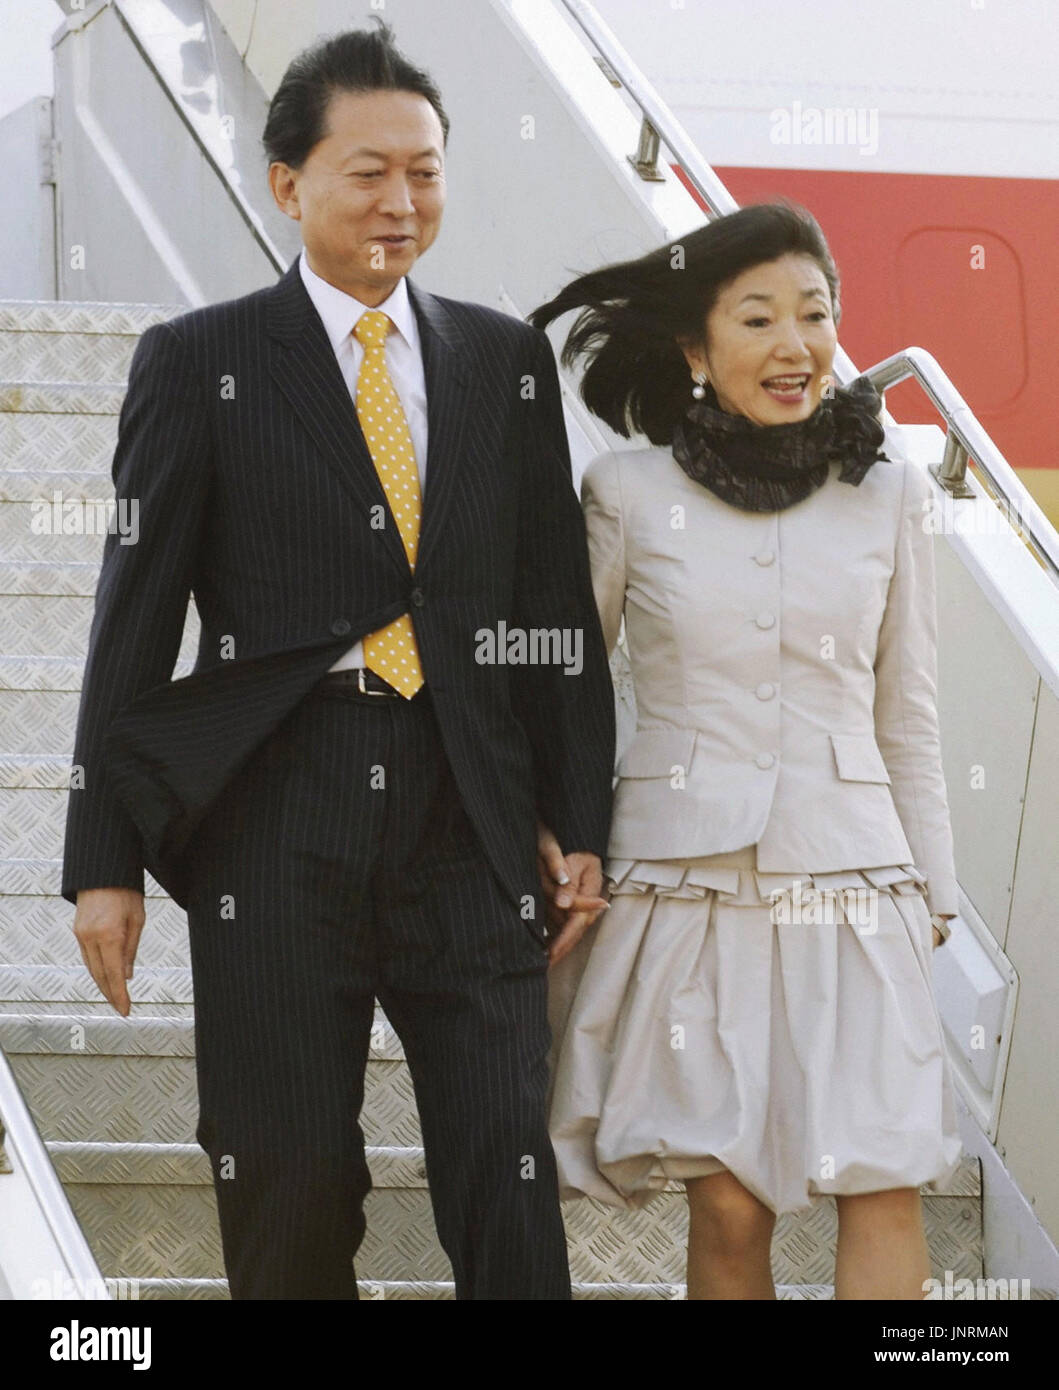 MUMBAI, India - Japanese Prime Minister Yukio Hatoyama (L) and his wife Miyuki alight from their aircraft on arriving in Mumbai on Dec. 27, 2009. Hatoyama arrived in the western Indian city the same day on the first leg of a three-day visit to India. (Kyodo) Stock Photo